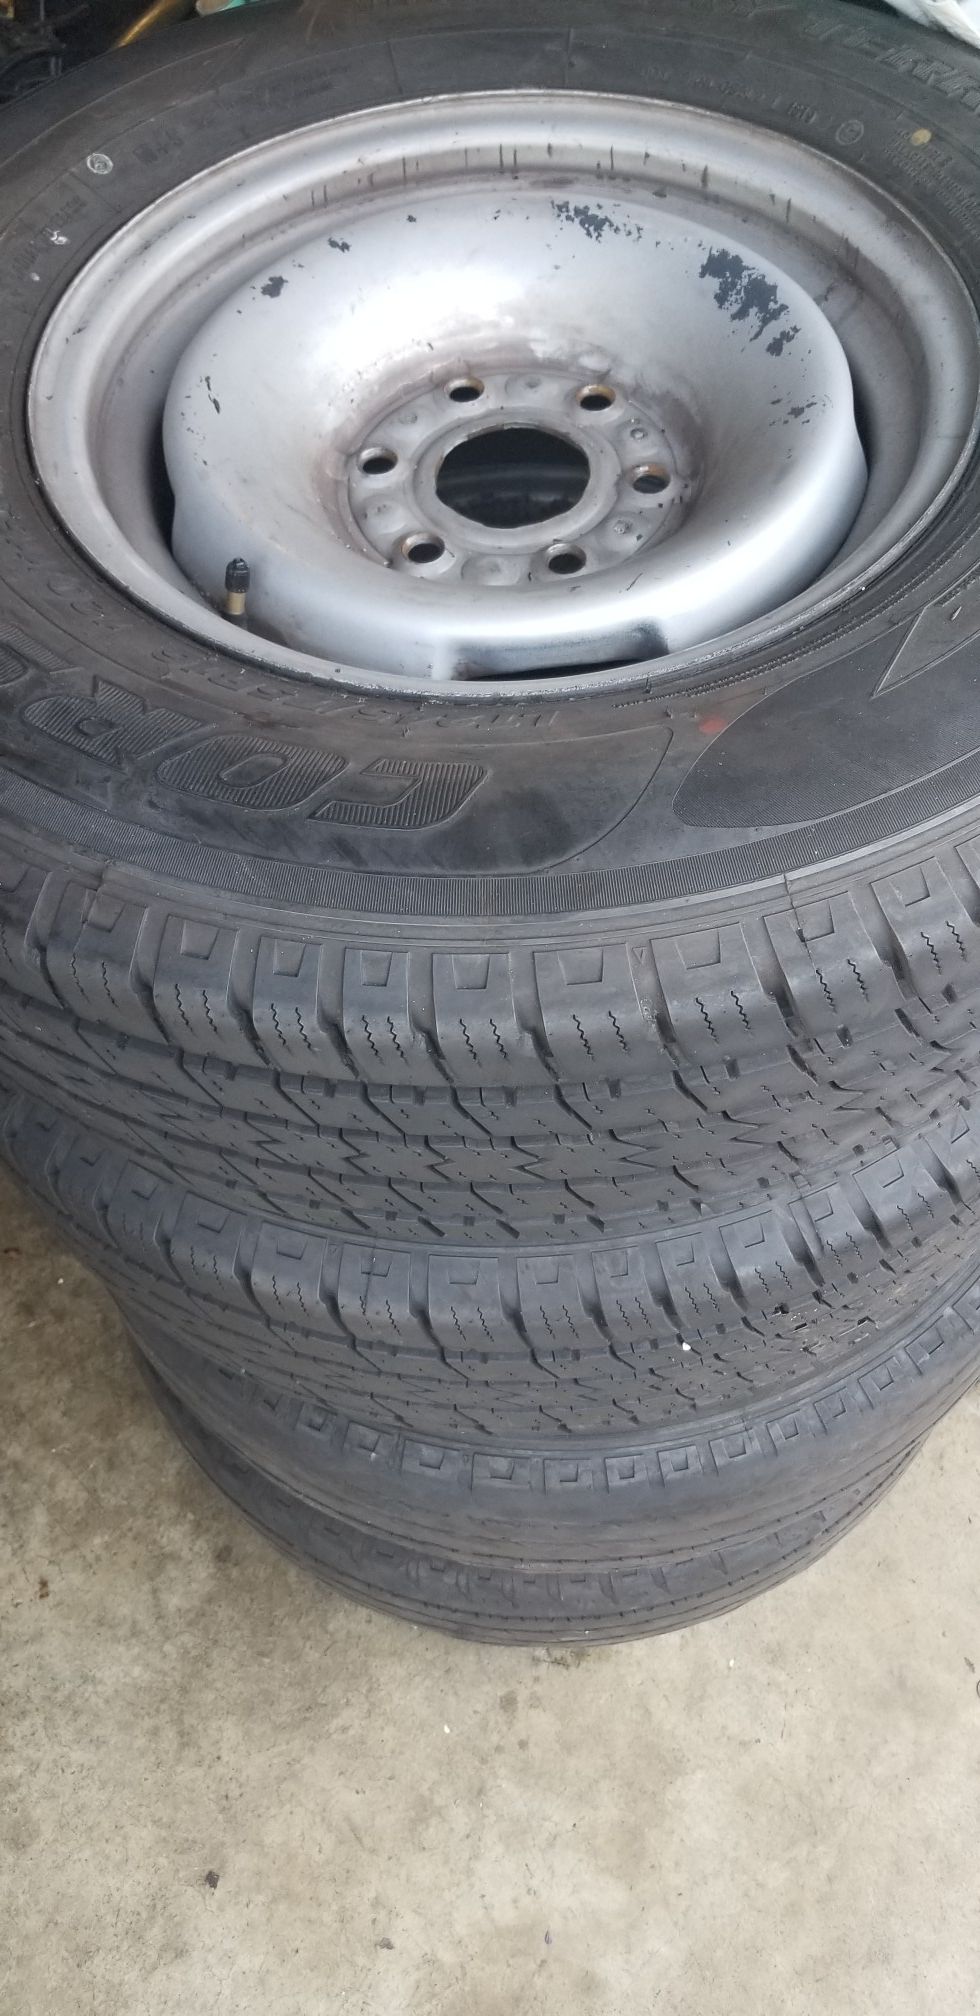 Full set of GM 6 lug rims and tires